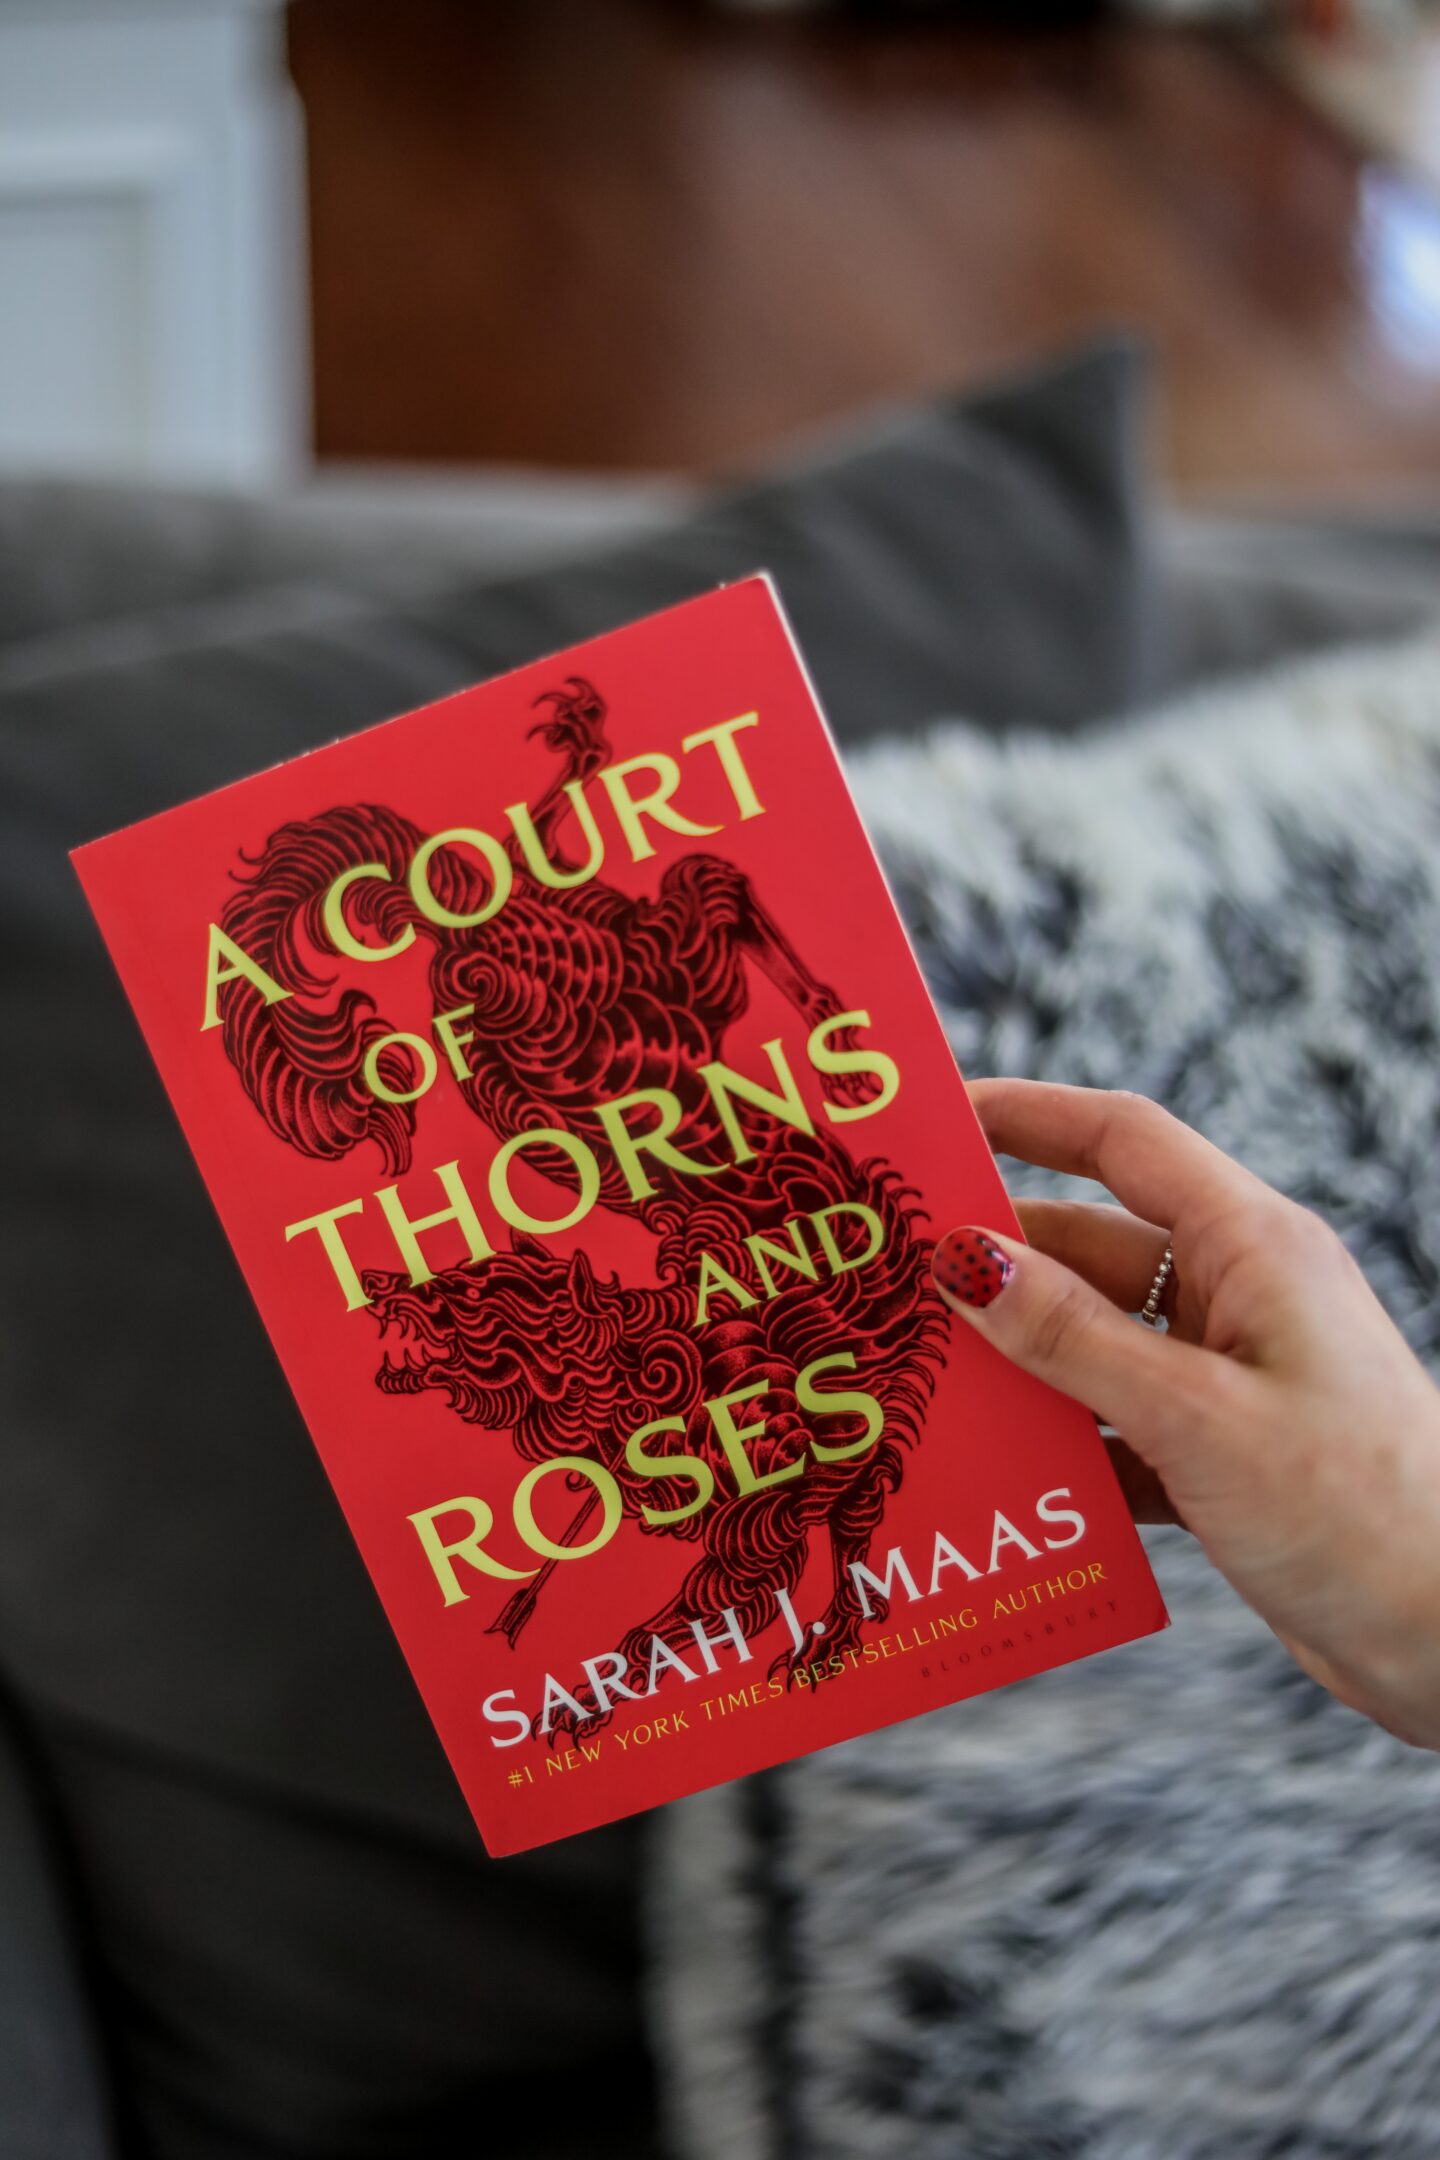 COOL SH*T I LOVELOVELOVE - Monthly Favorites, June 2022 on Coming Up Roses - A COURT OF THORNS AND ROSES BOOK